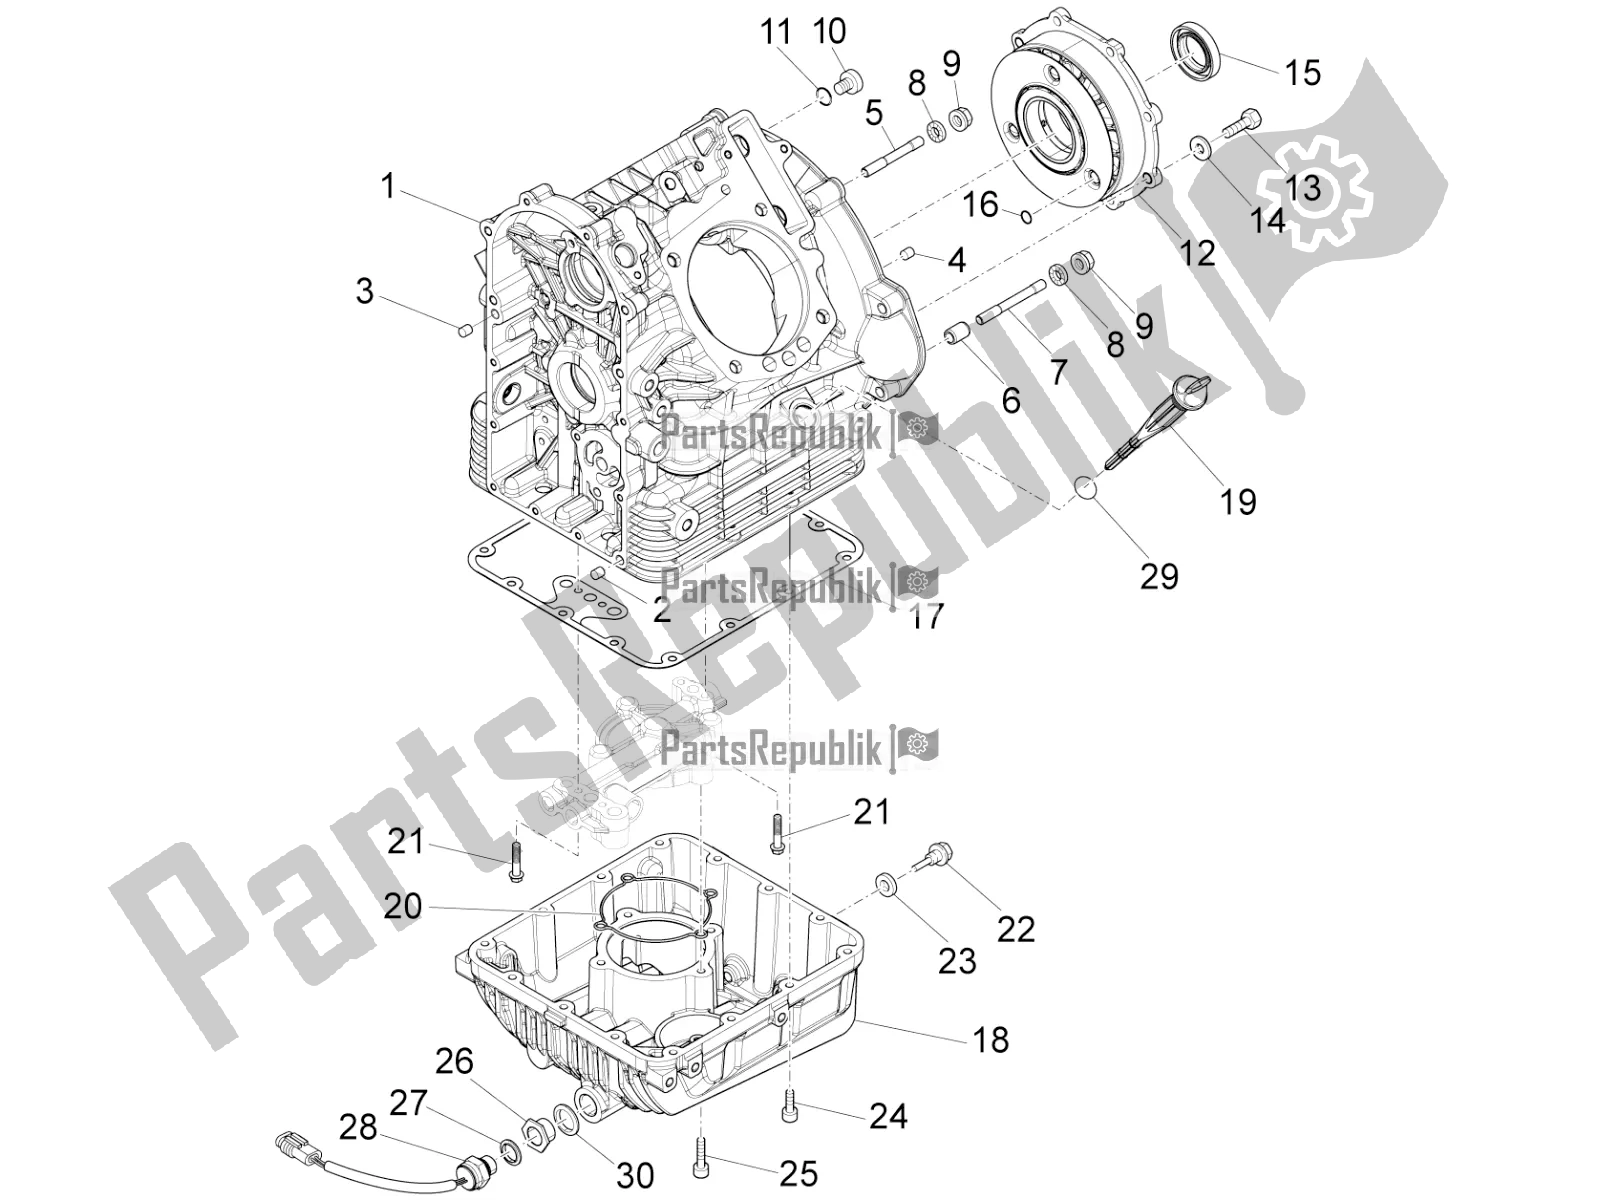 All parts for the Crankcases I of the Moto-Guzzi California 1400 Touring ABS 2017